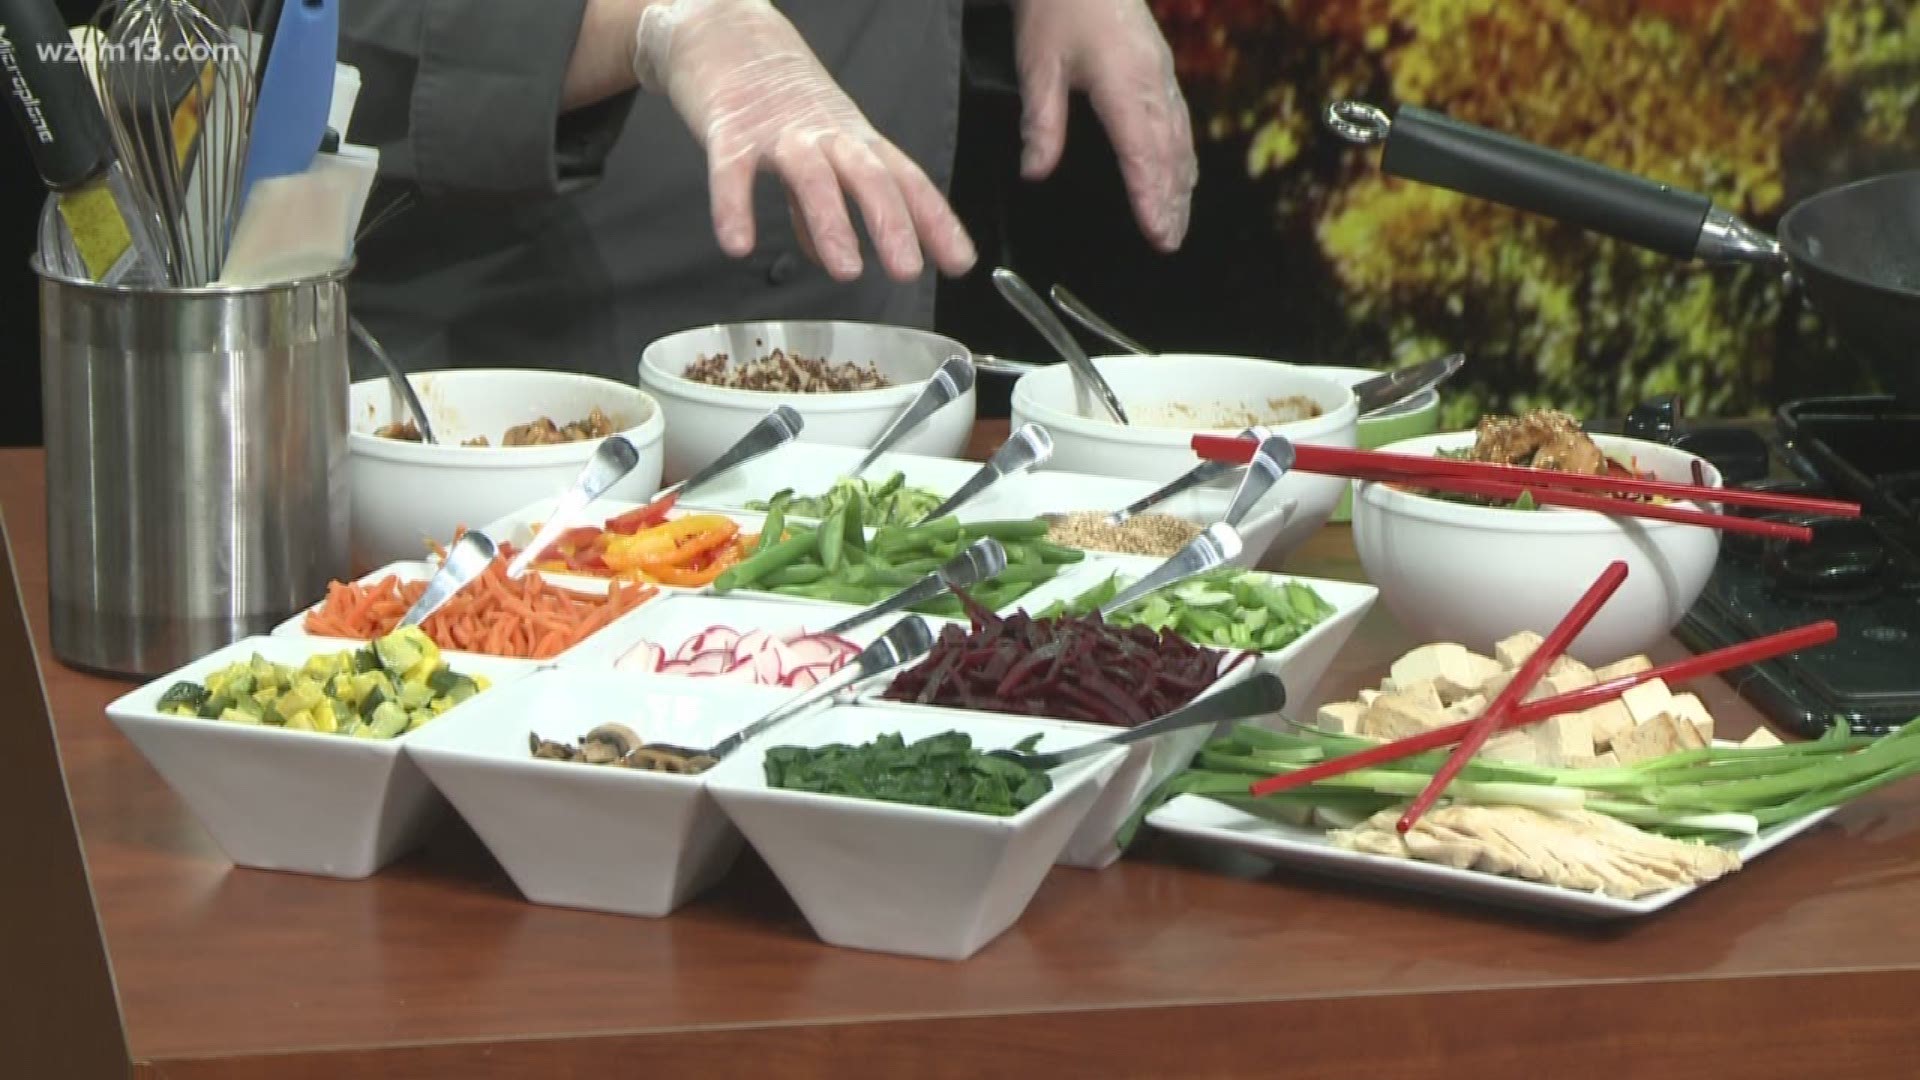 Chef Jenn provides new options for lunch on the Noon News Friday, Dec. 21, 2018.